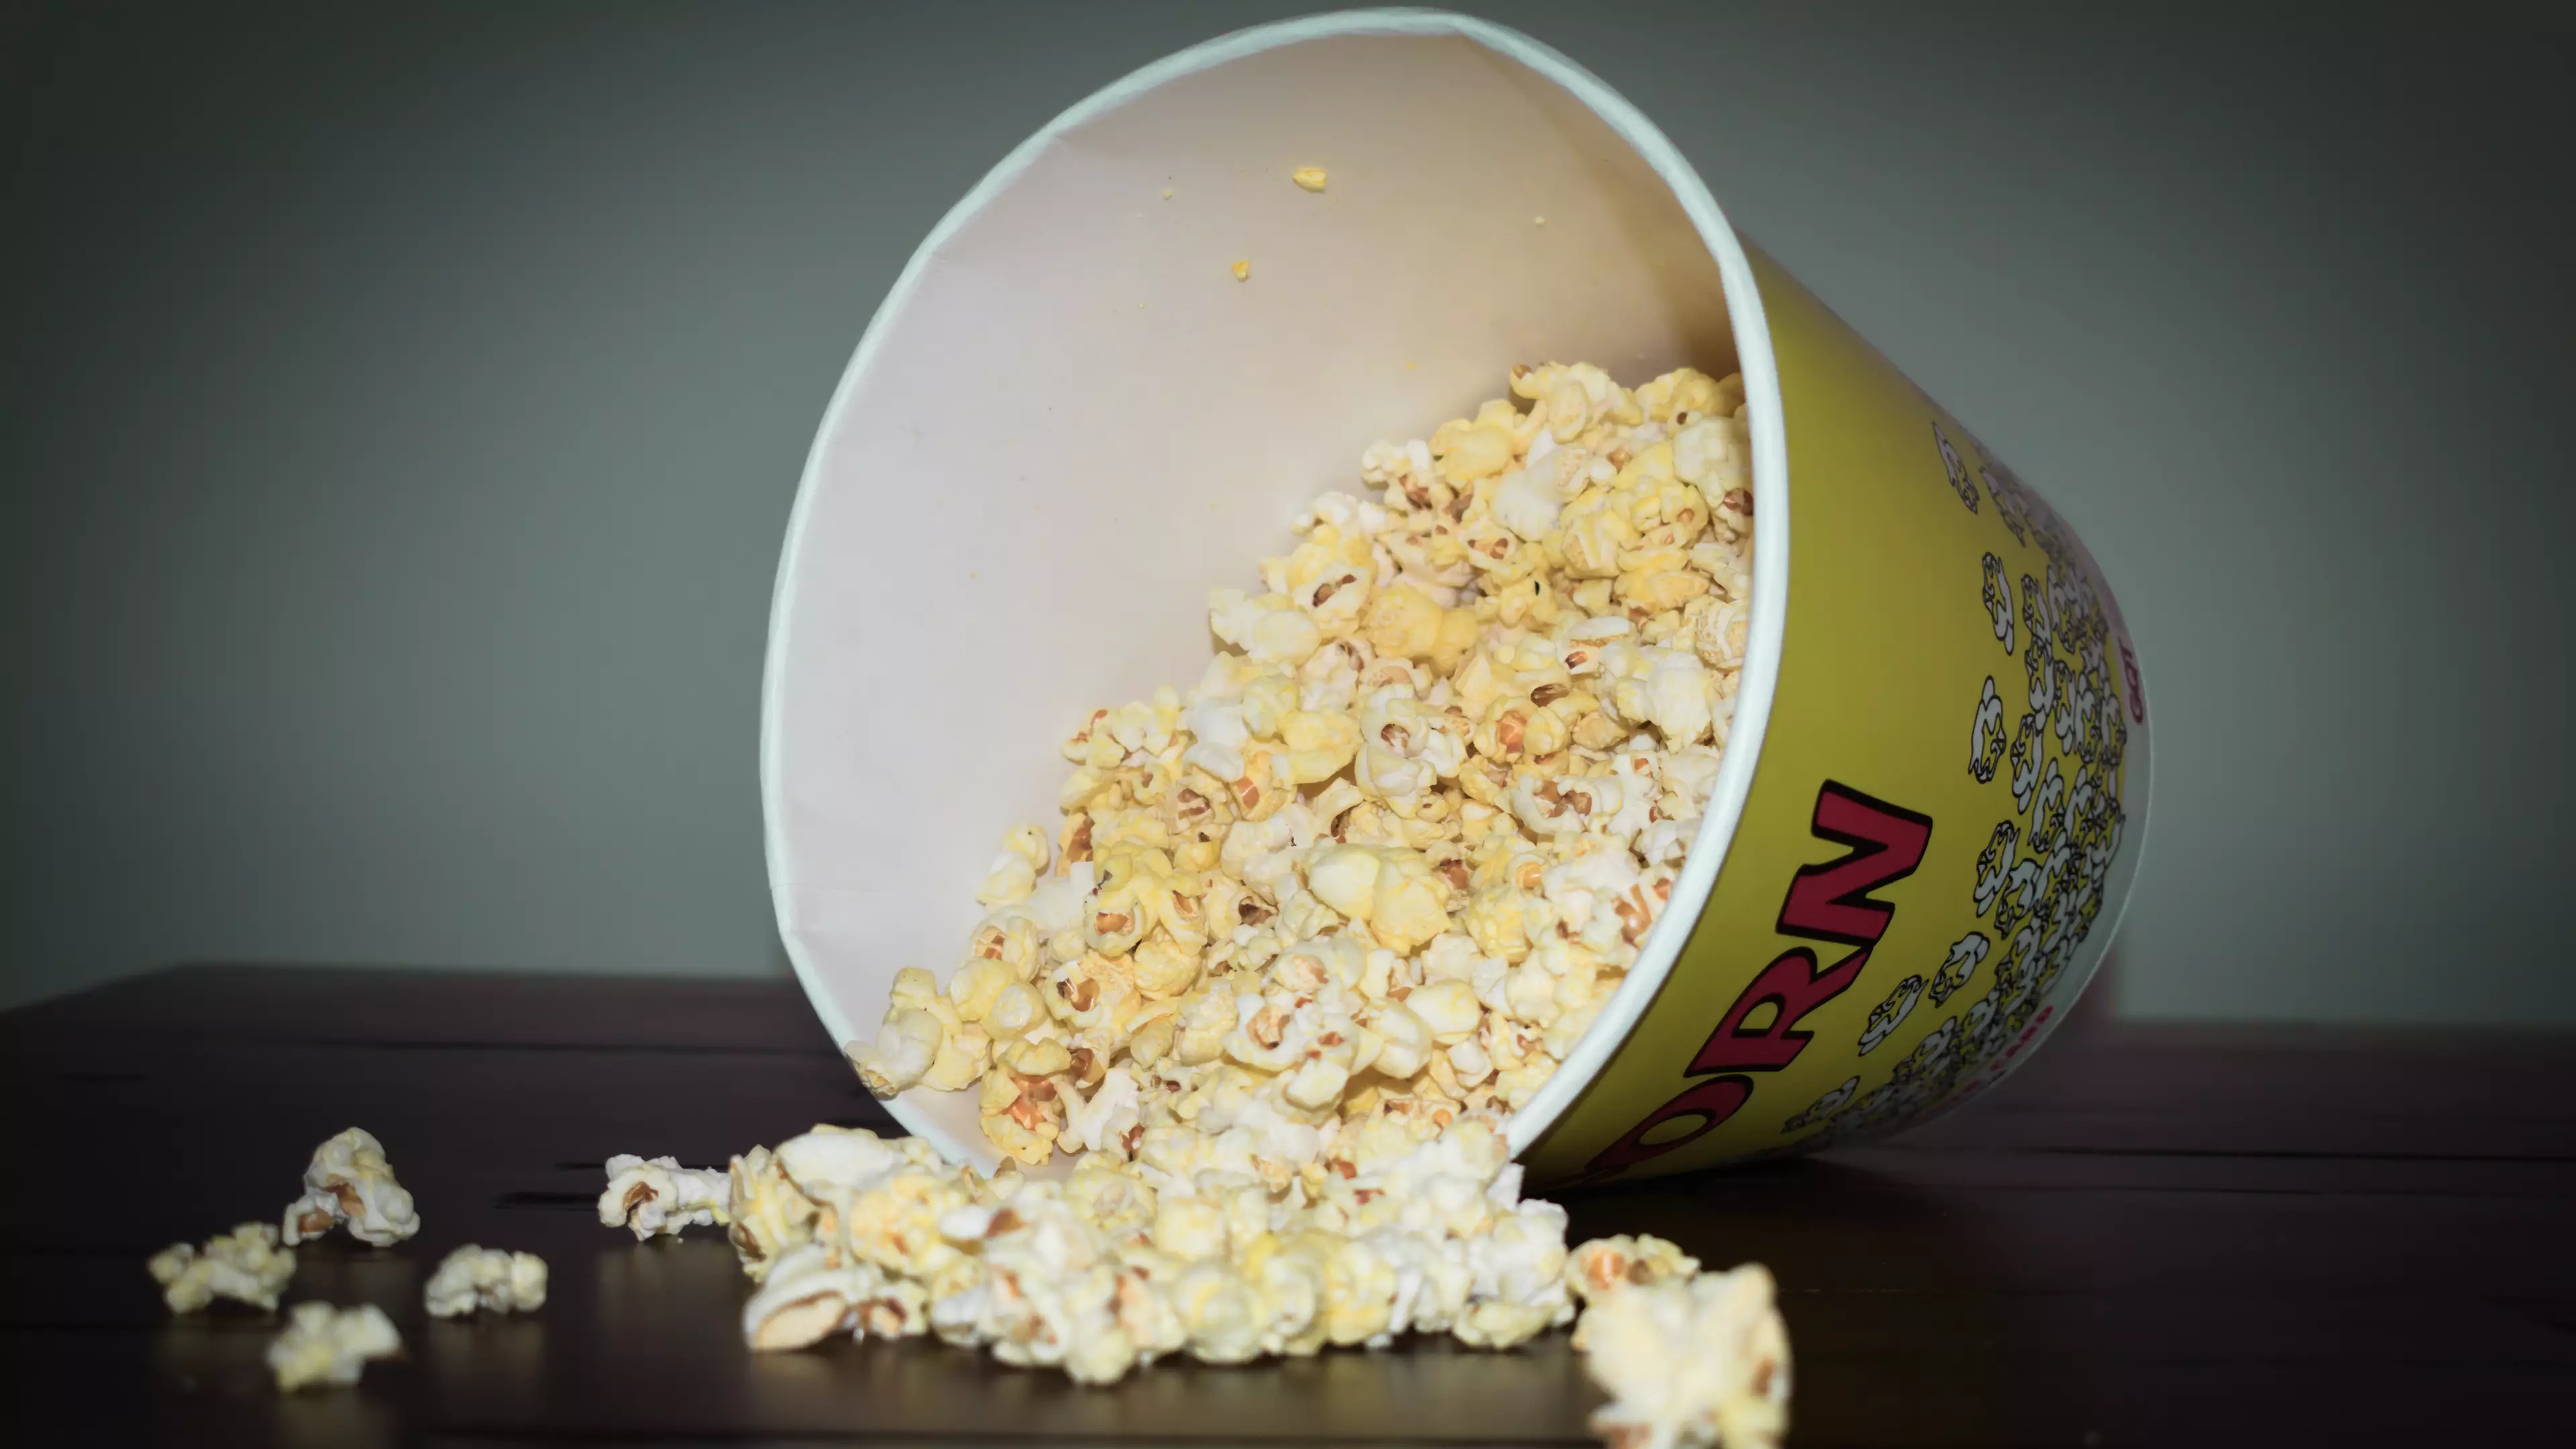 People Are Realising You're Allowed To Take Your Own Snacks Into The Cinema